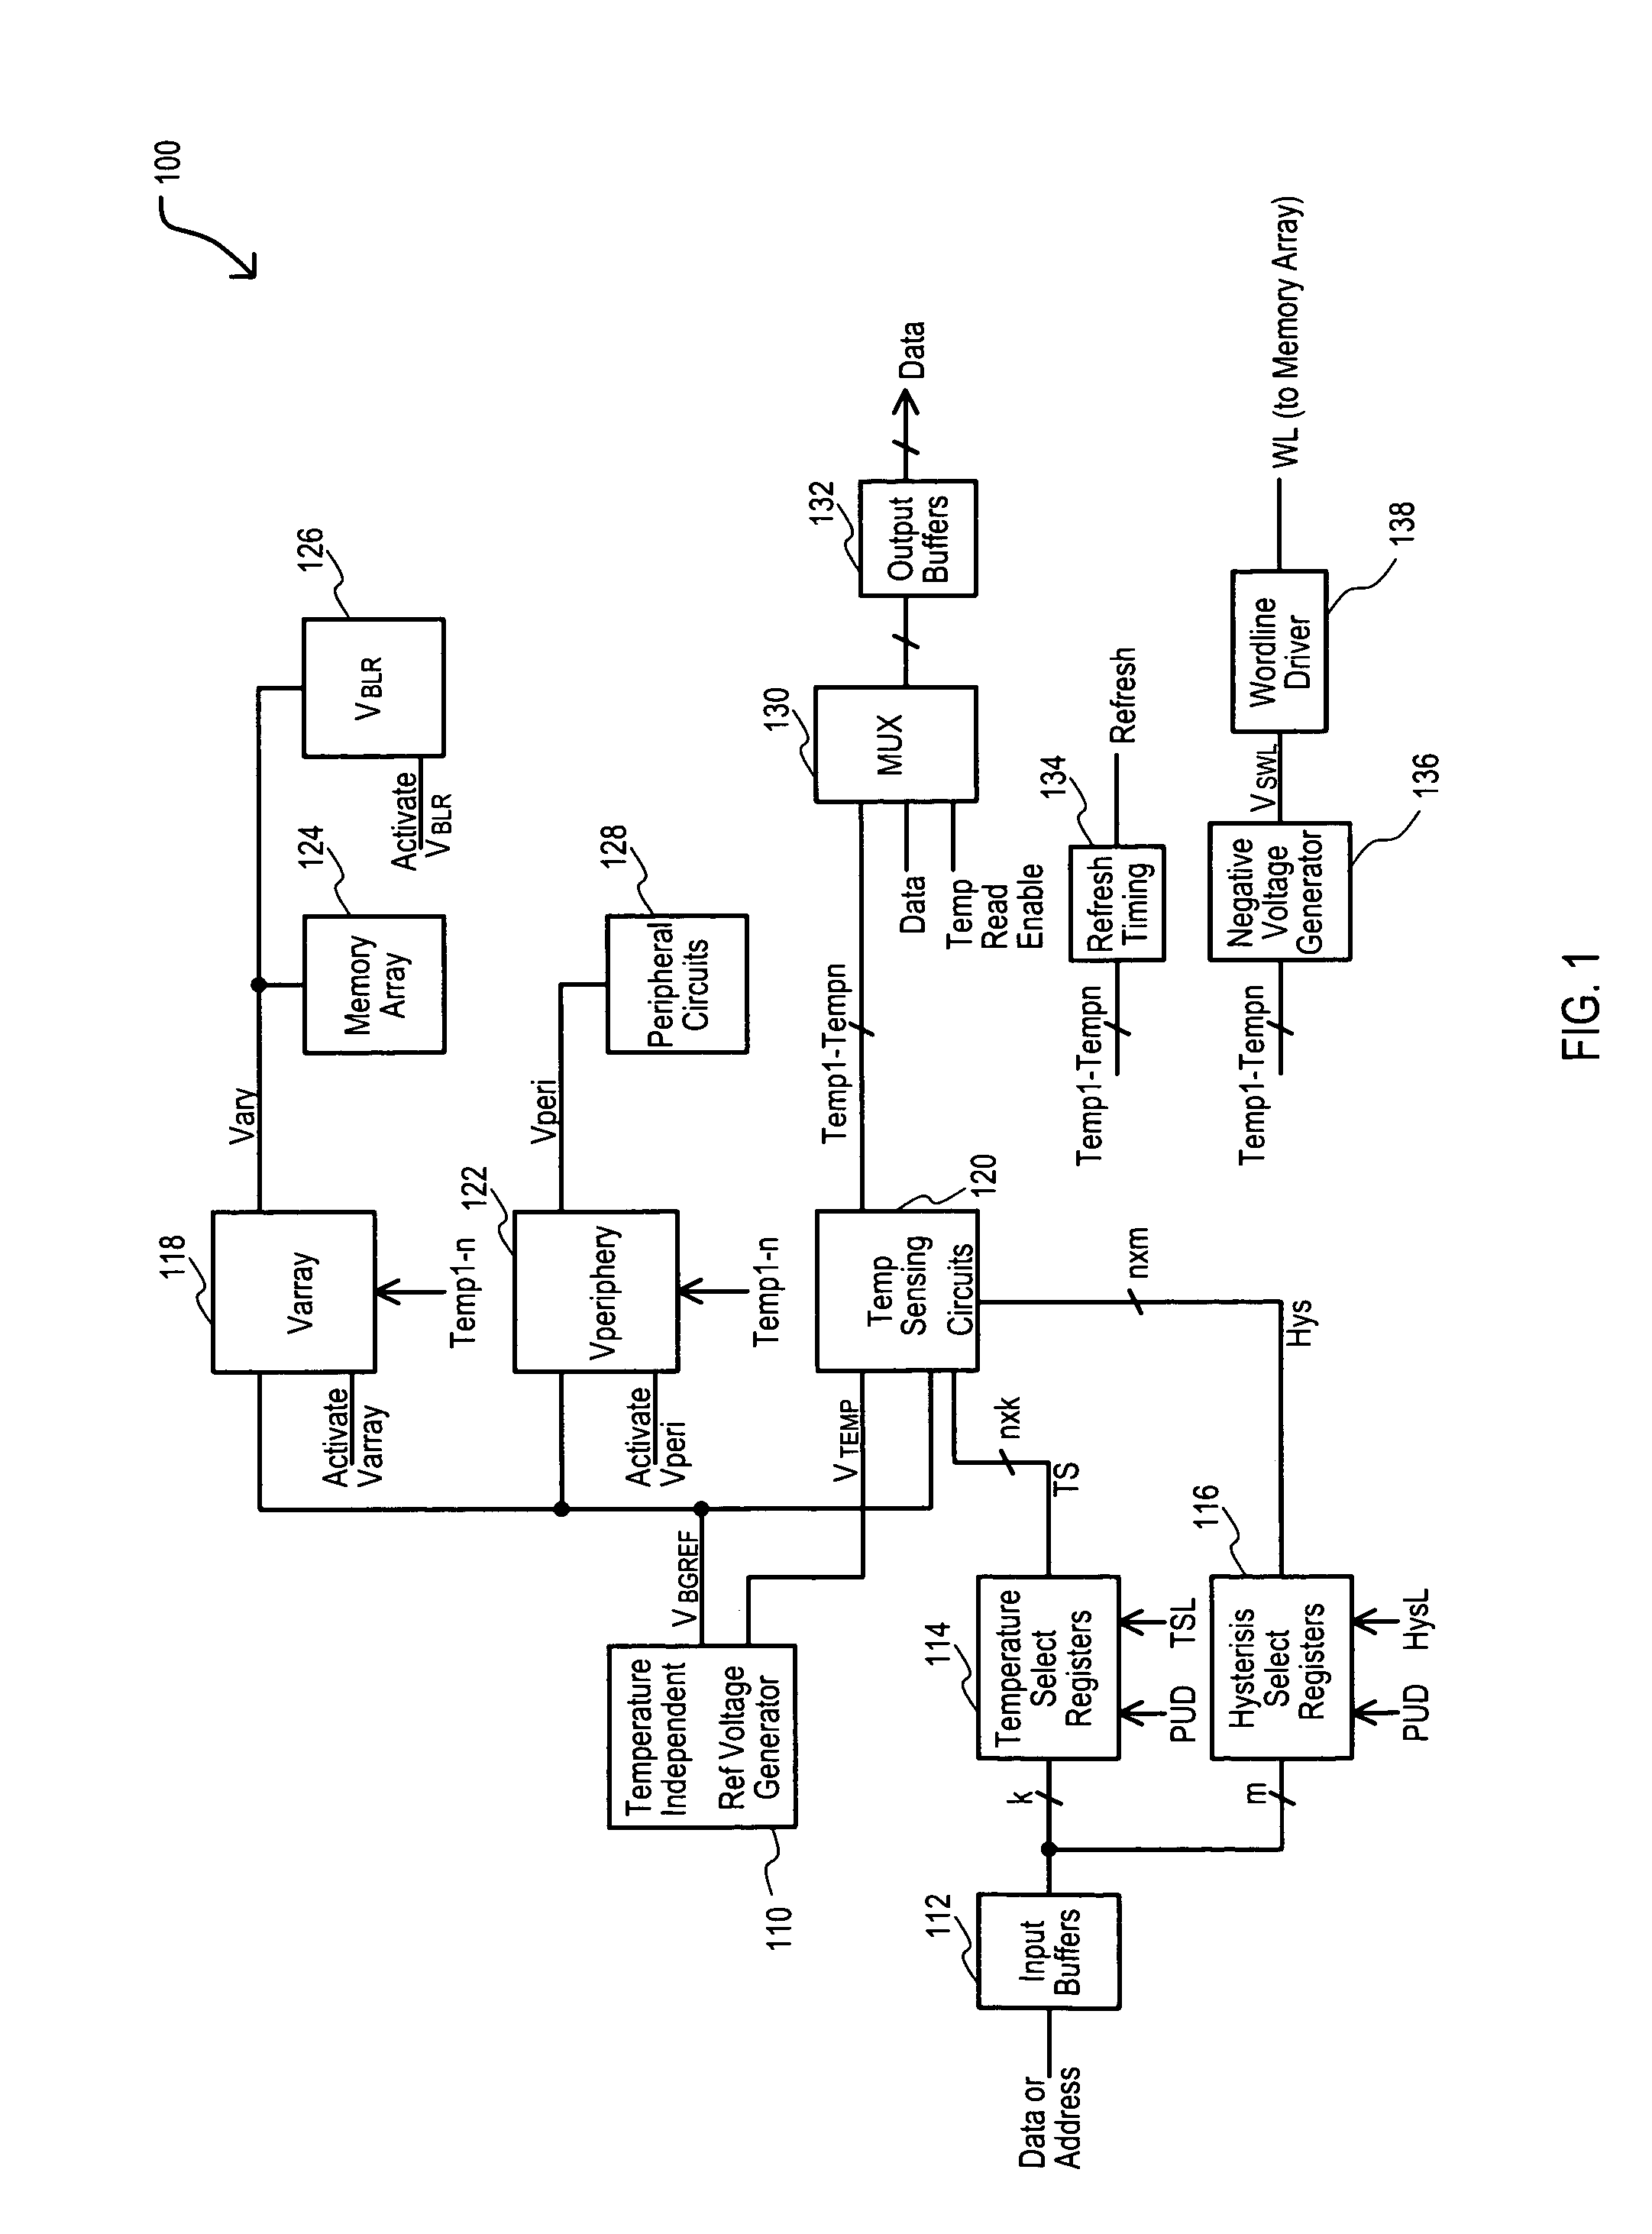 Semiconductor device having variable parameter selection based on temperature and test method